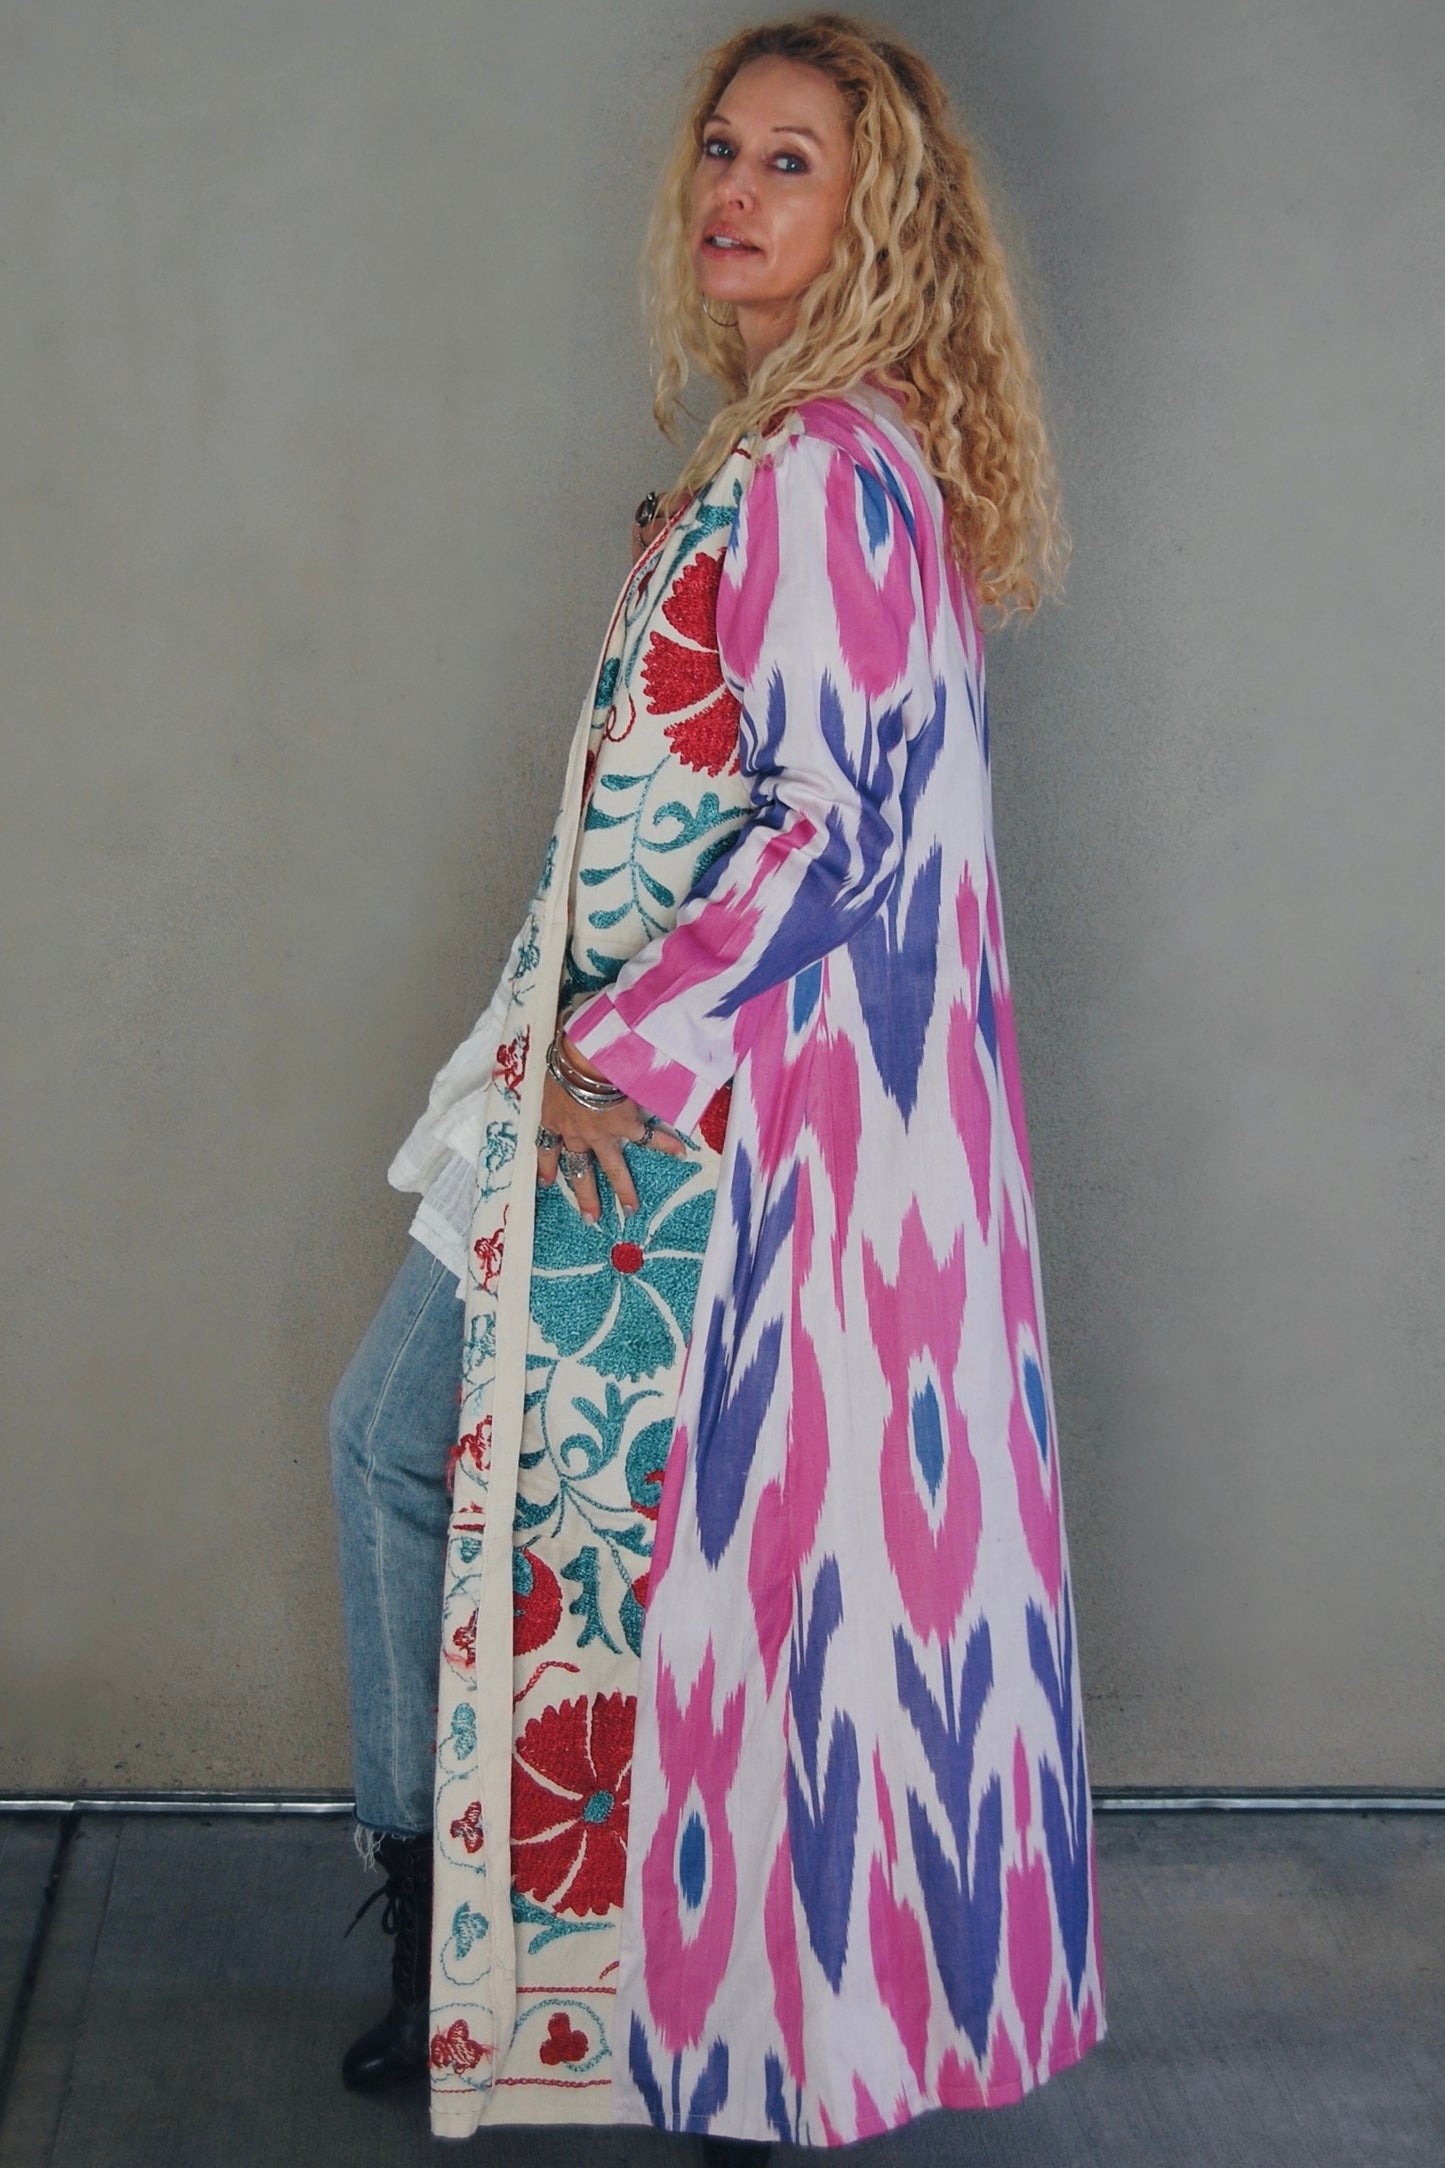 Load image into Gallery viewer, The Hadley Jacket in Daisy - SpiritedBoutiques Boho Hippie Boutique Style Jacket, Spirited
